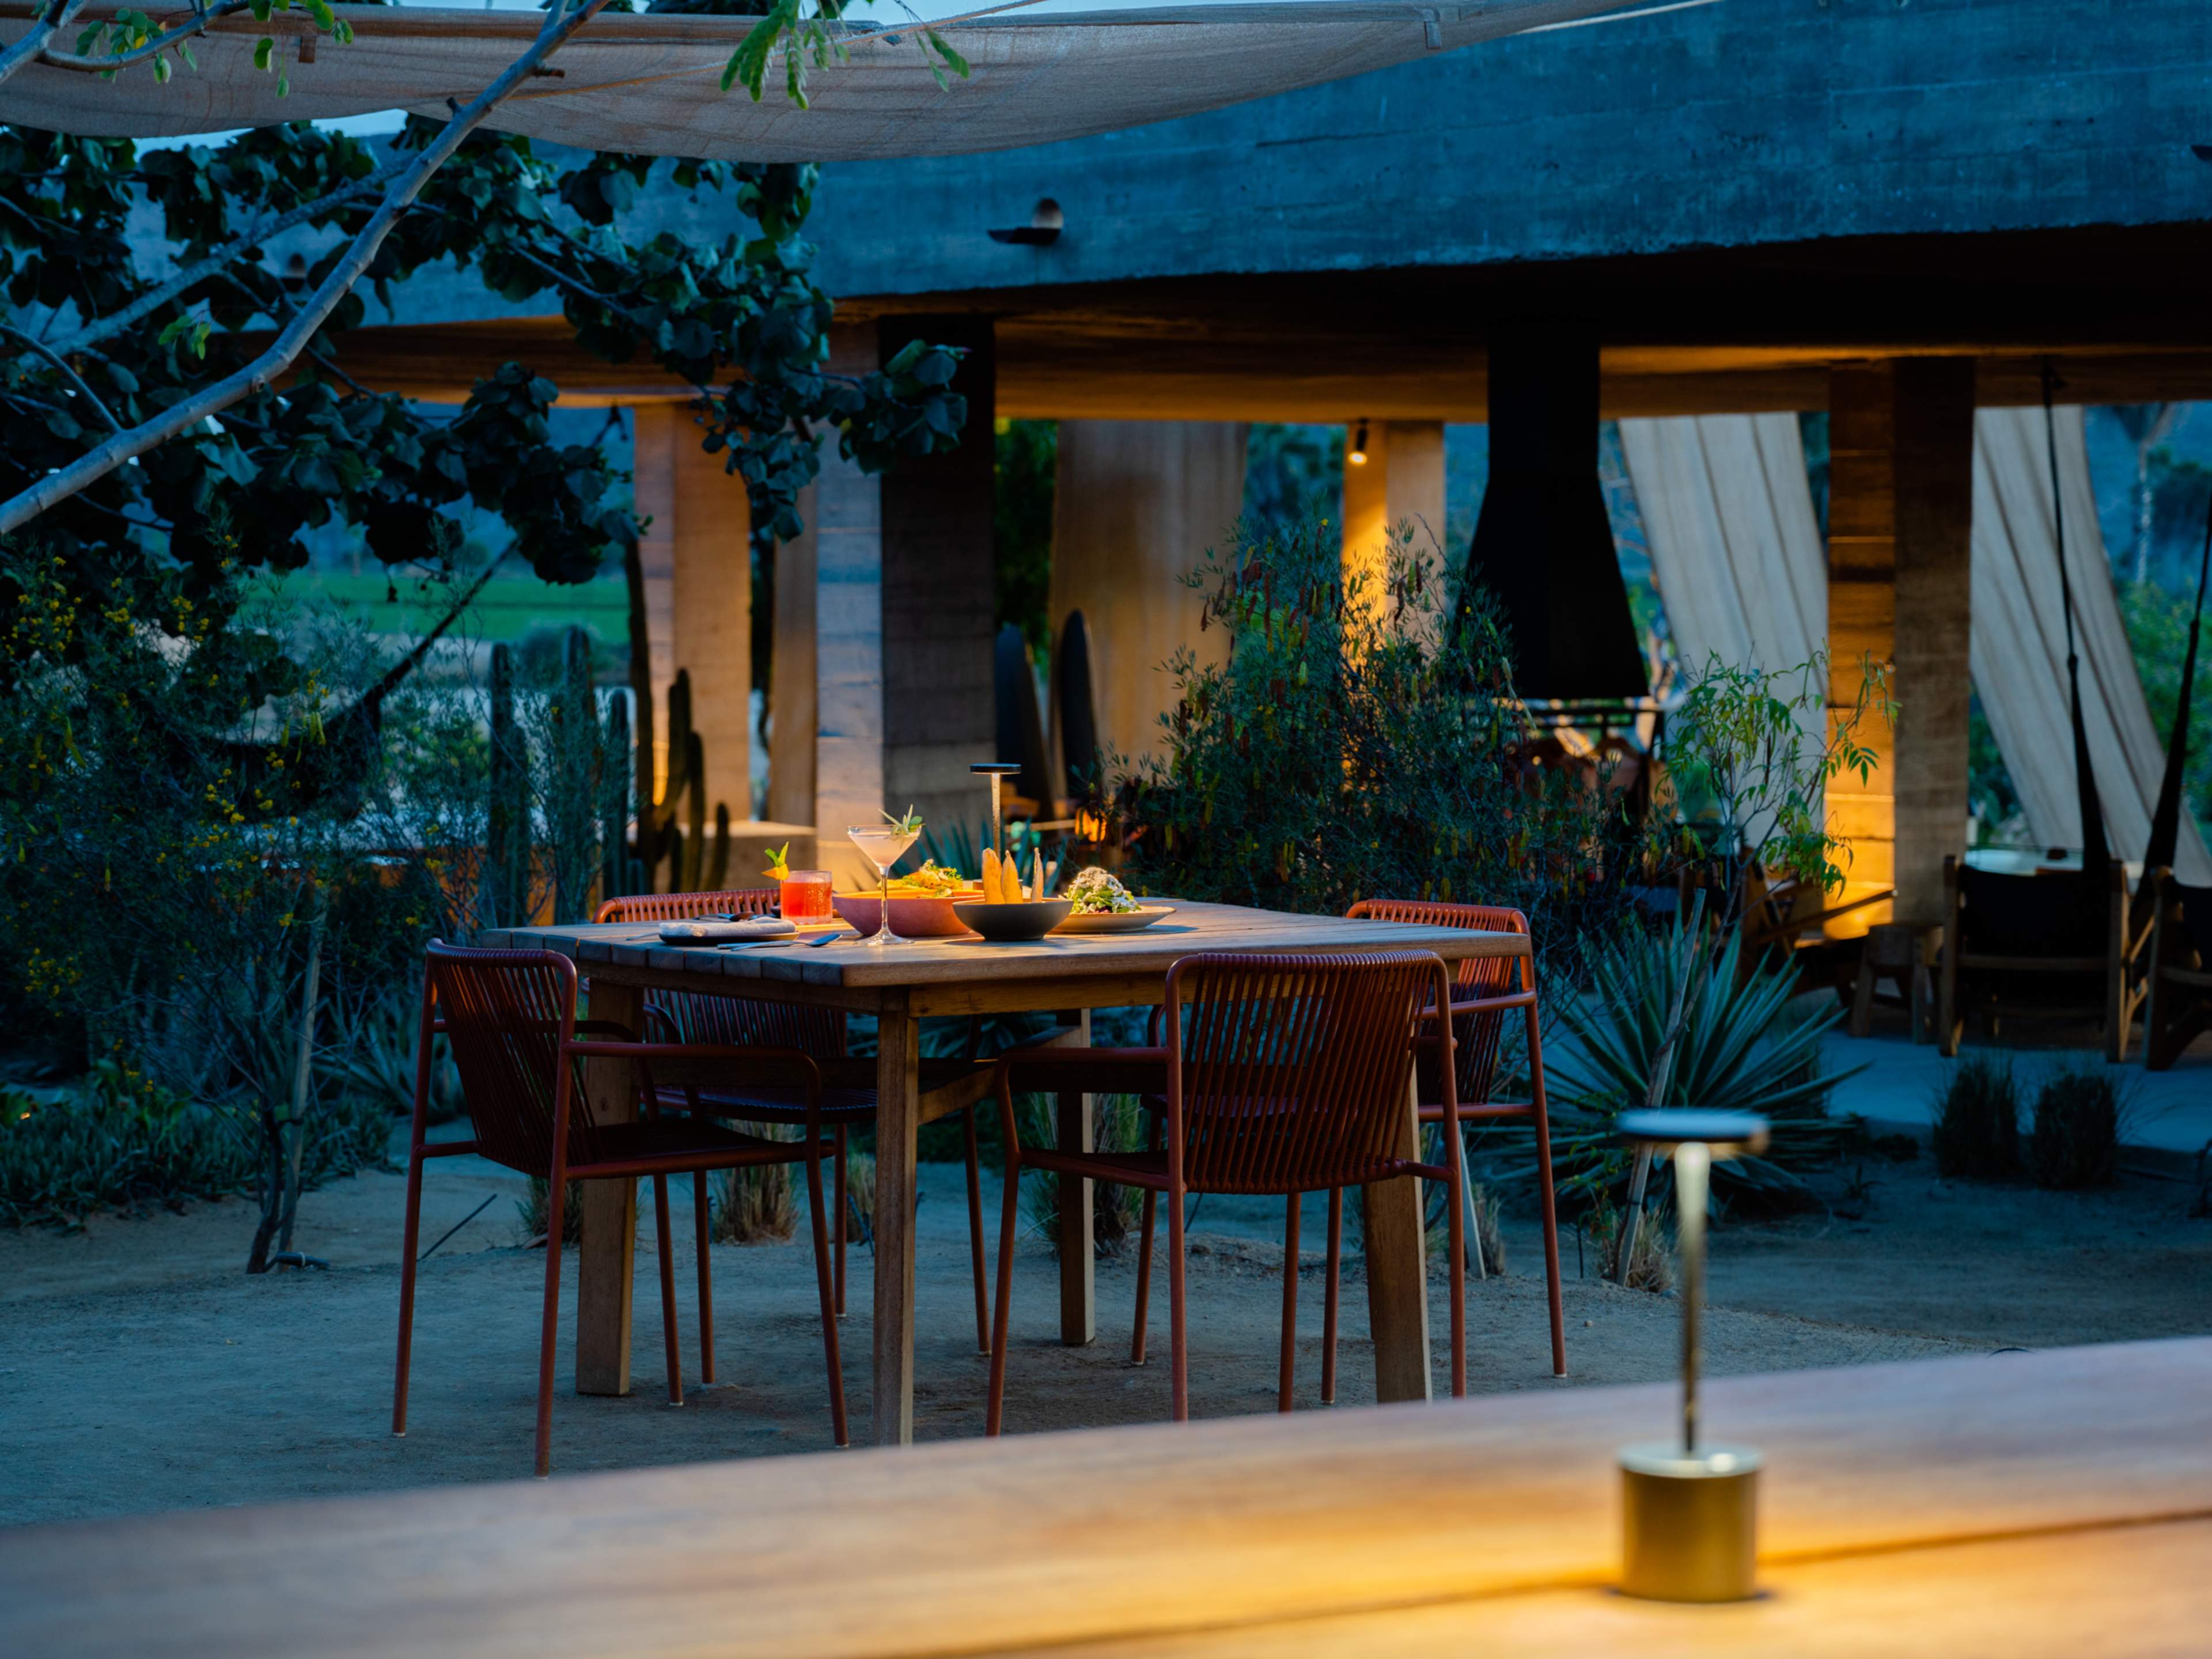 Spread of food from Tenoch on outdoor table at dusk